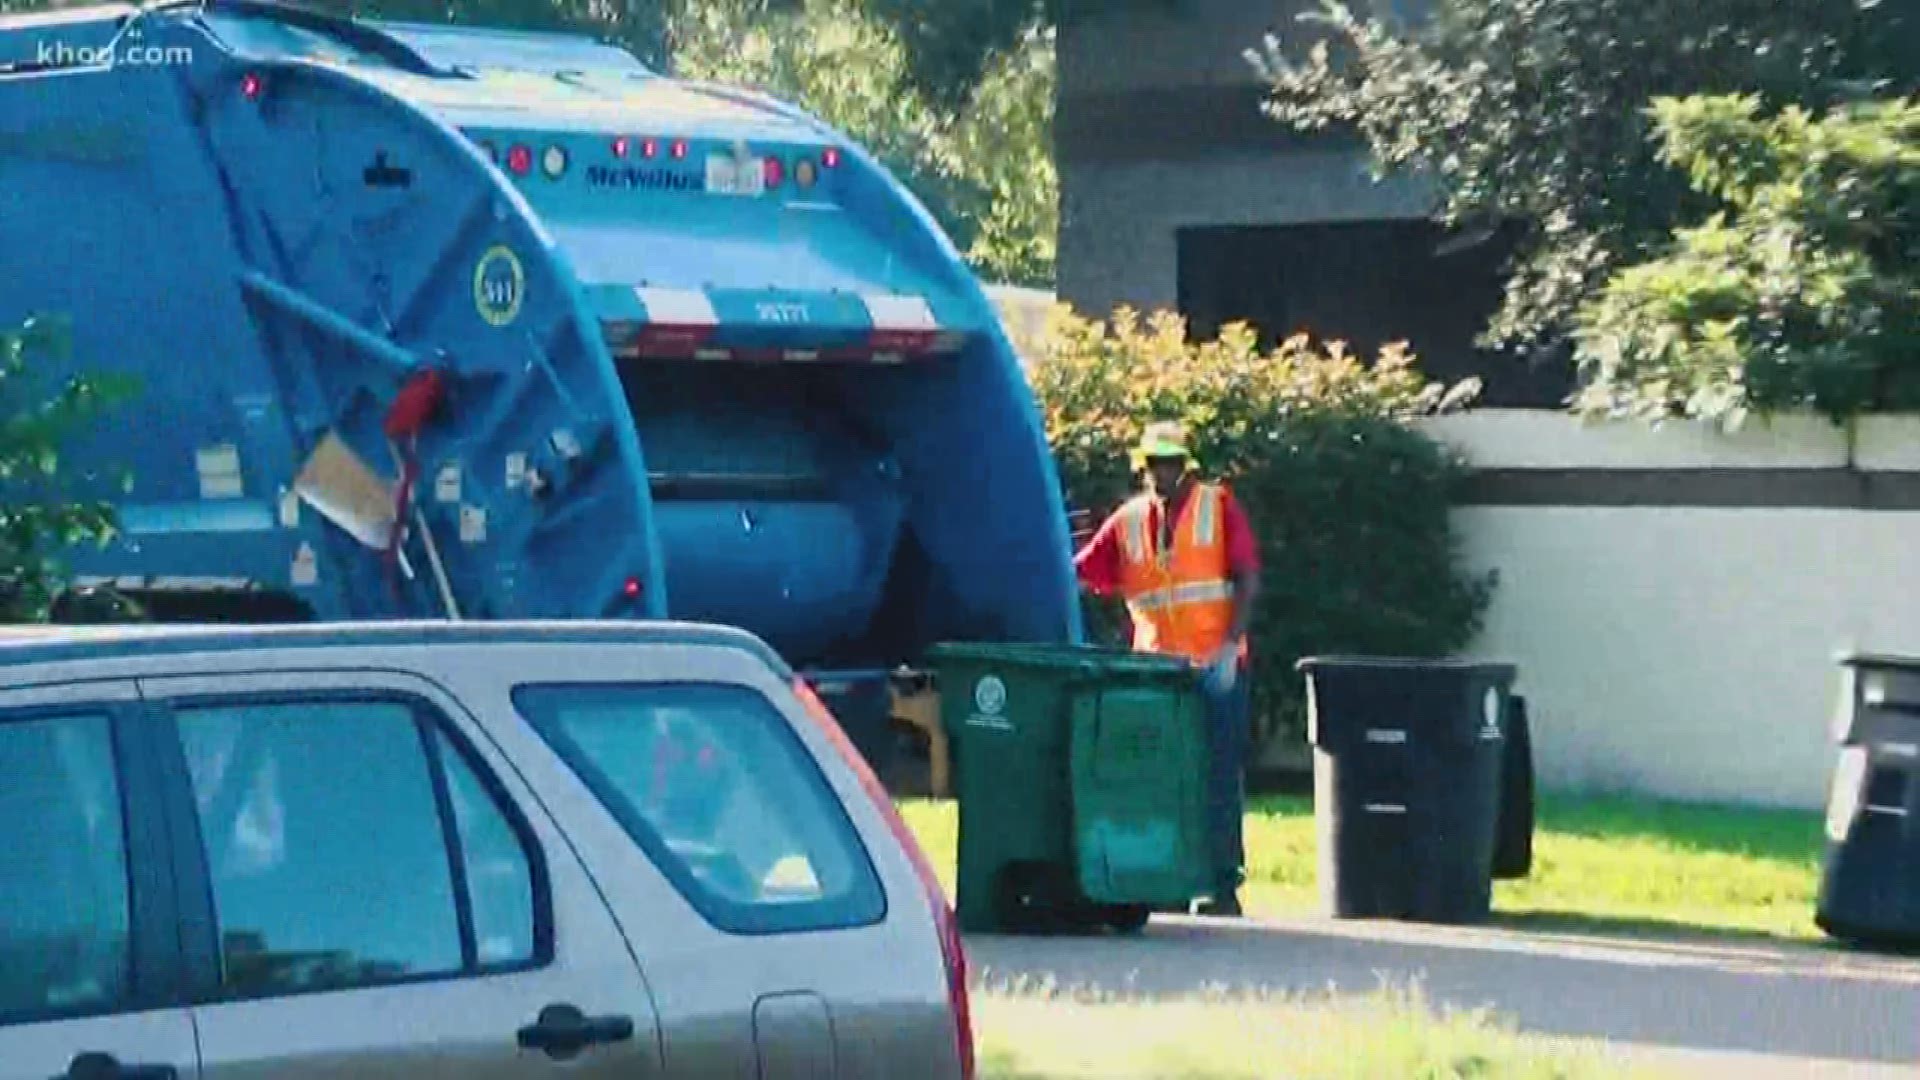 After a KHOU 11 story about a city garbage truck picking up trash and recyclables at the same time, homeowners are exposing the City of Houston's claims that it was an isolated incident.